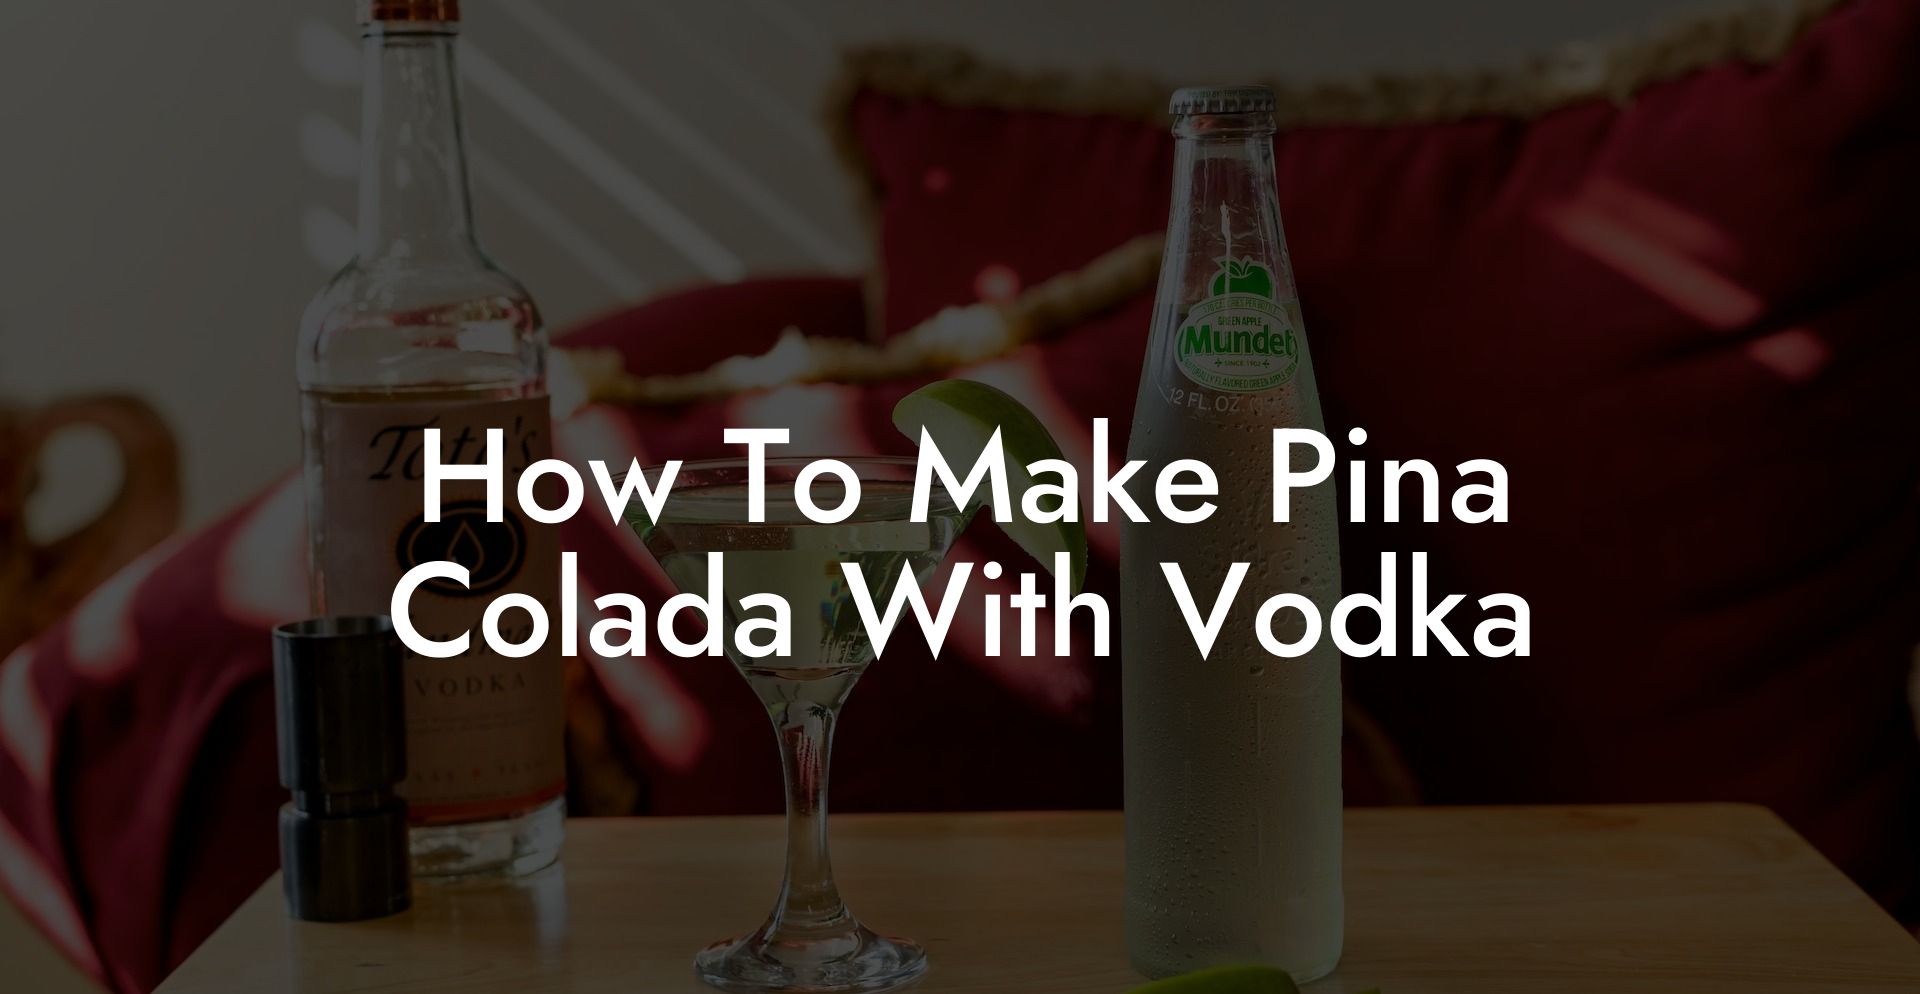 How To Make Pina Colada With Vodka